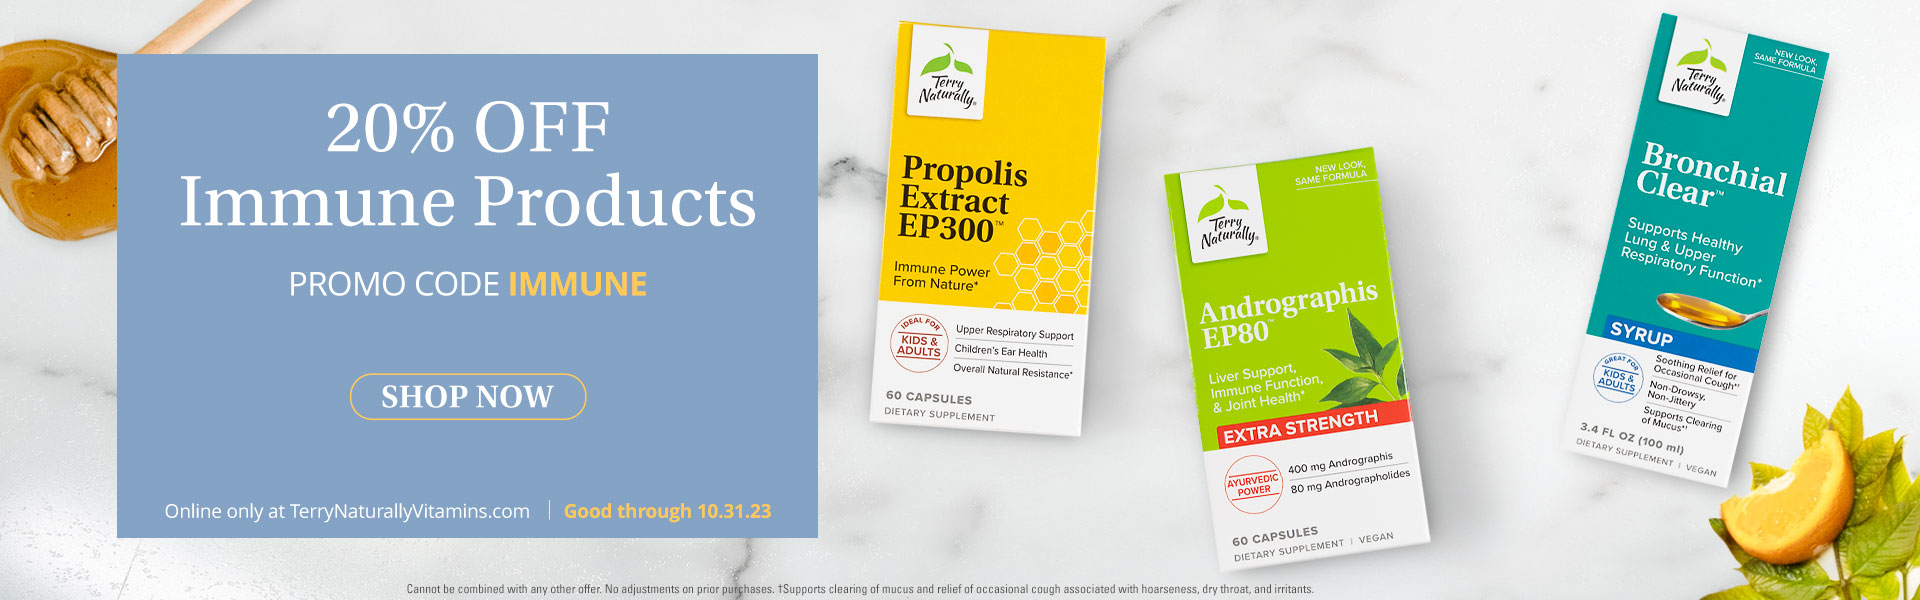 20% Off Immune Products | Terry Naturally